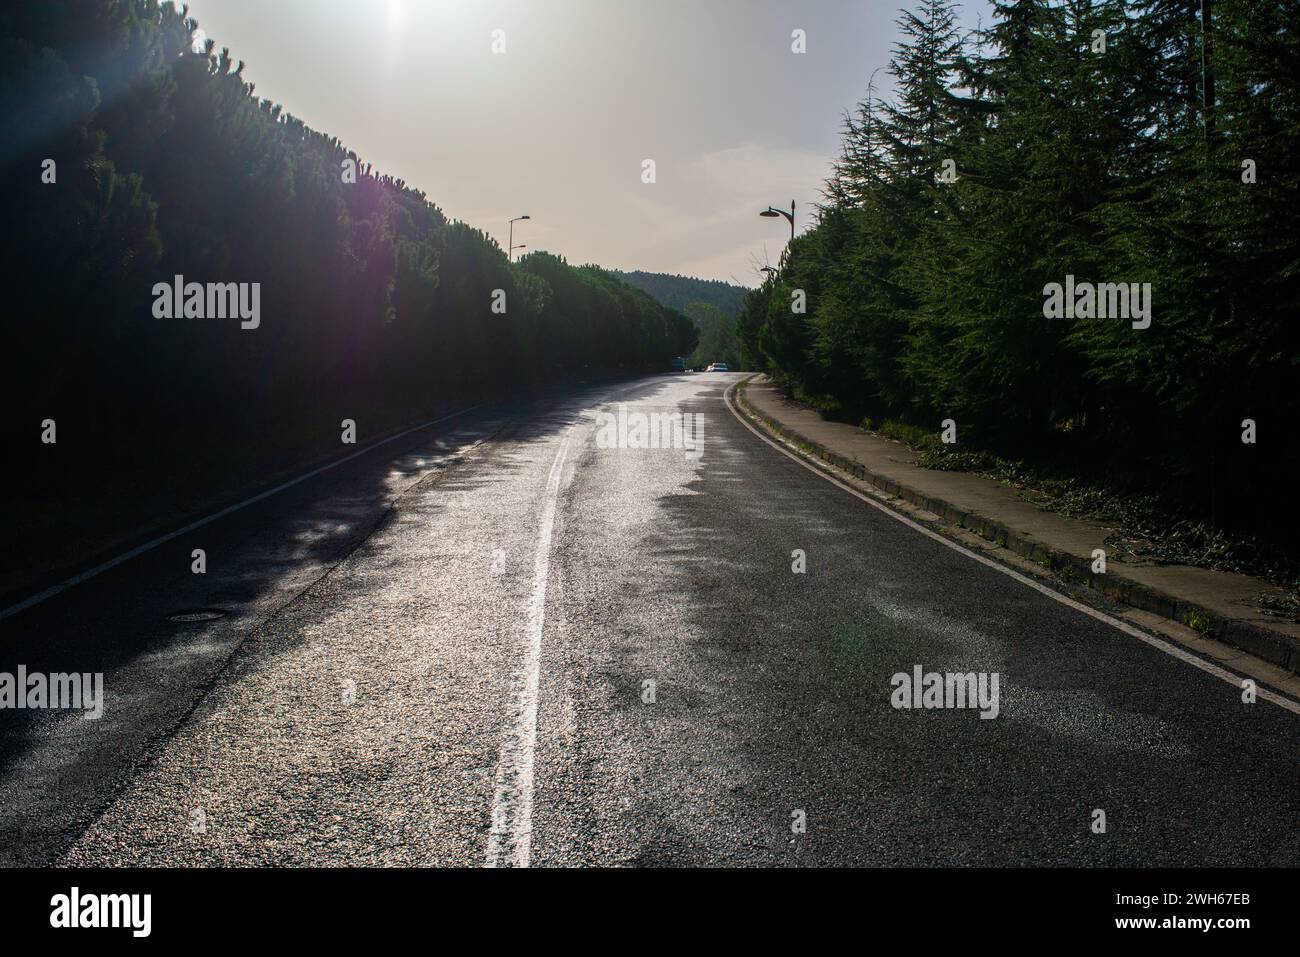 A serene view of a rainy asphalt road in nature, its wet surface glistening with moisture, capturing the tranquillity of a gray, damp landscape. Stock Photo